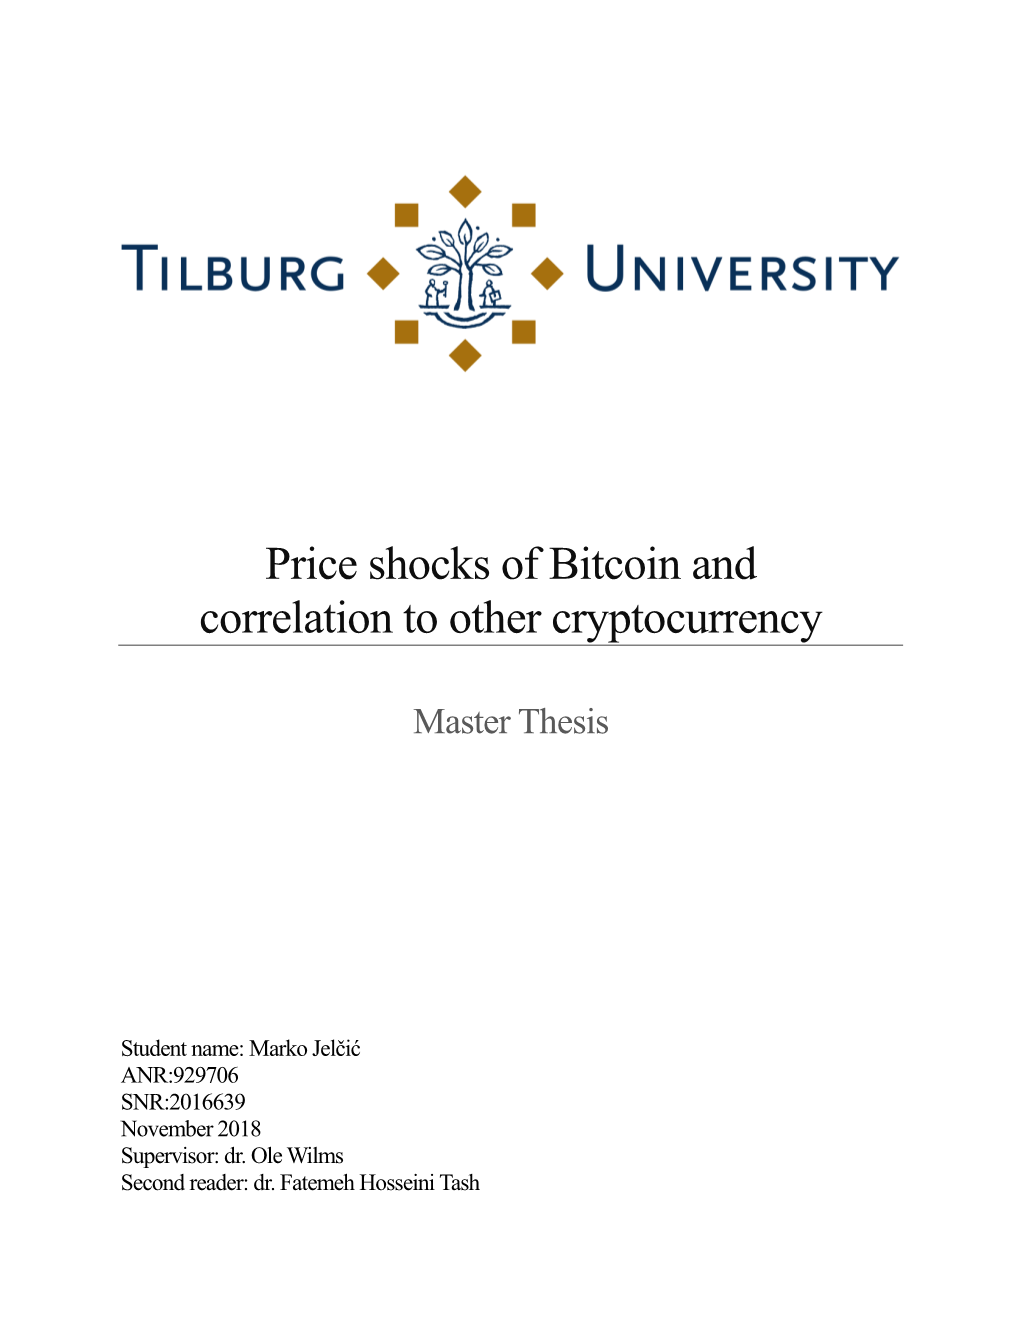 Price Shocks of Bitcoin and Correlation to Other Cryptocurrency